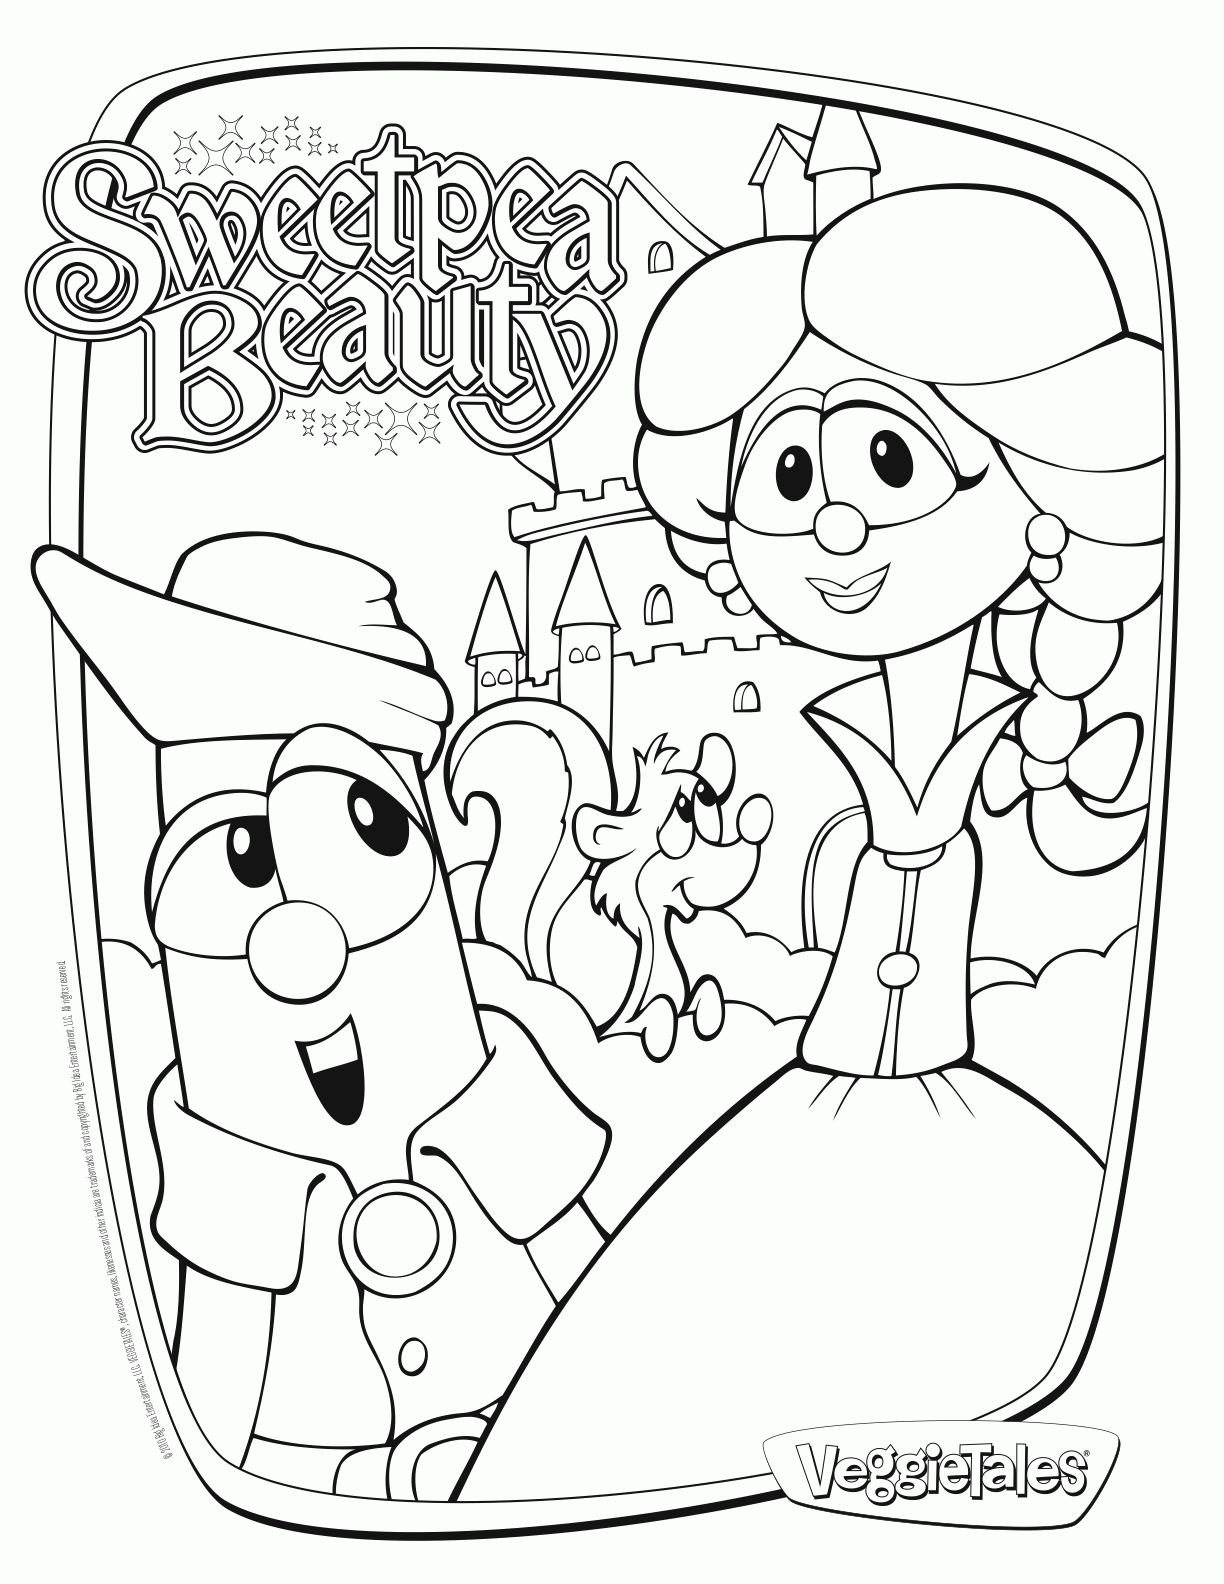 Bible Veggietales Coloring Pages   Coloring Pages For All Ages ...